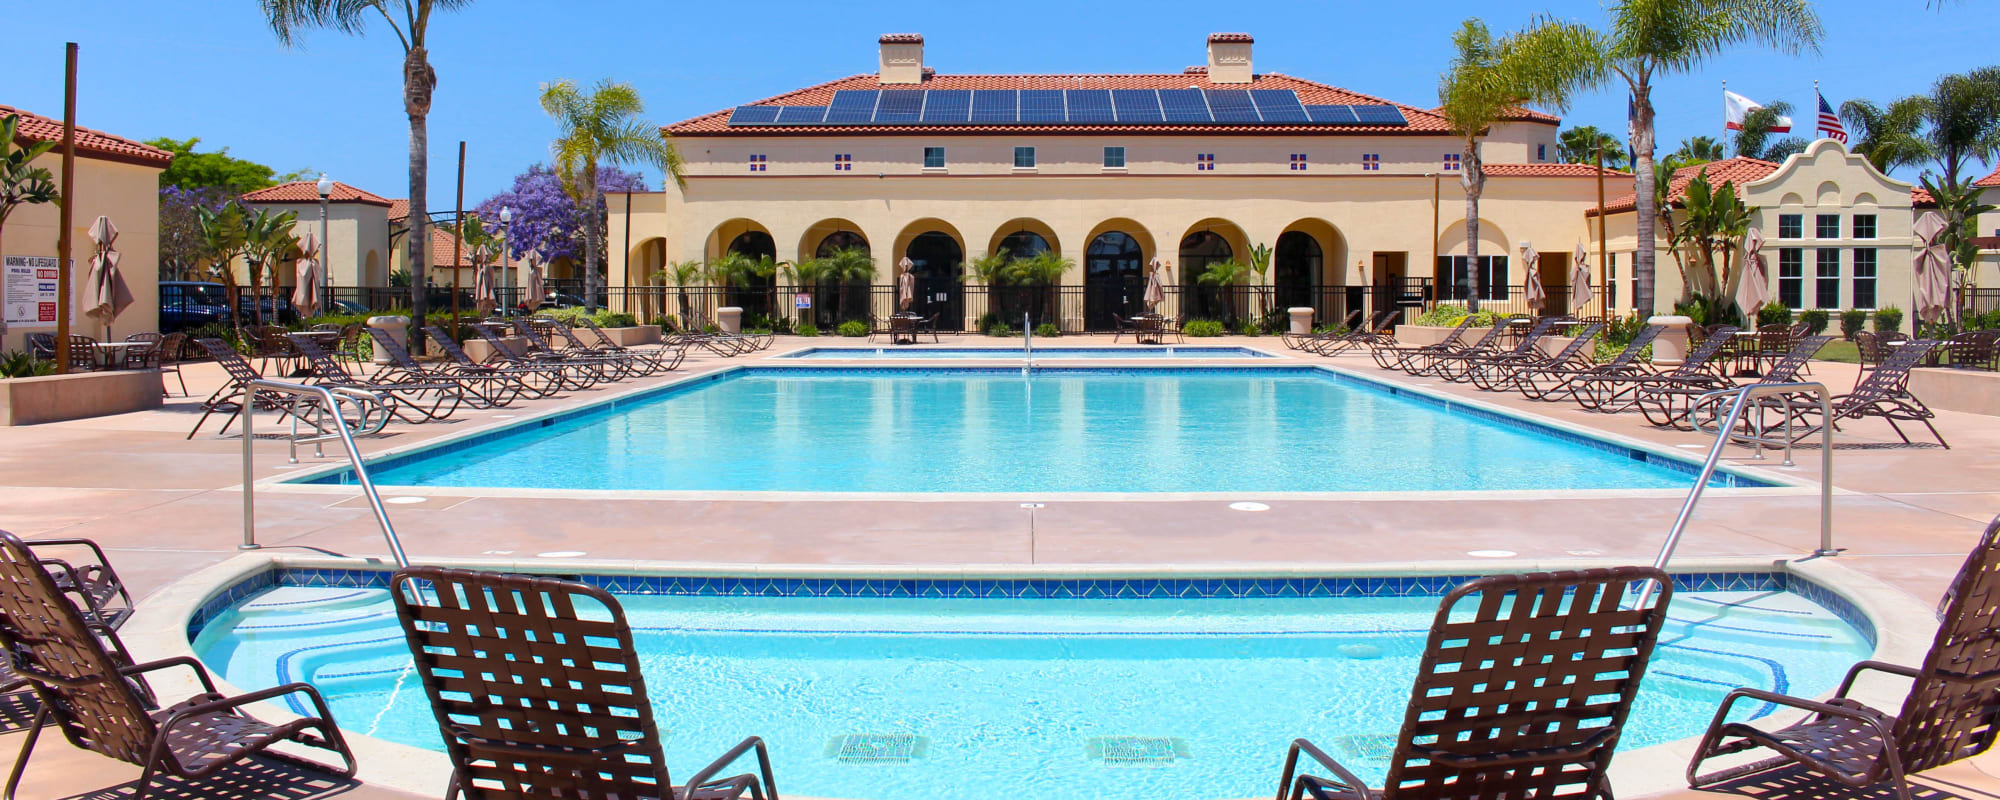 A swimming pool at The Village at NTC in San Diego, California